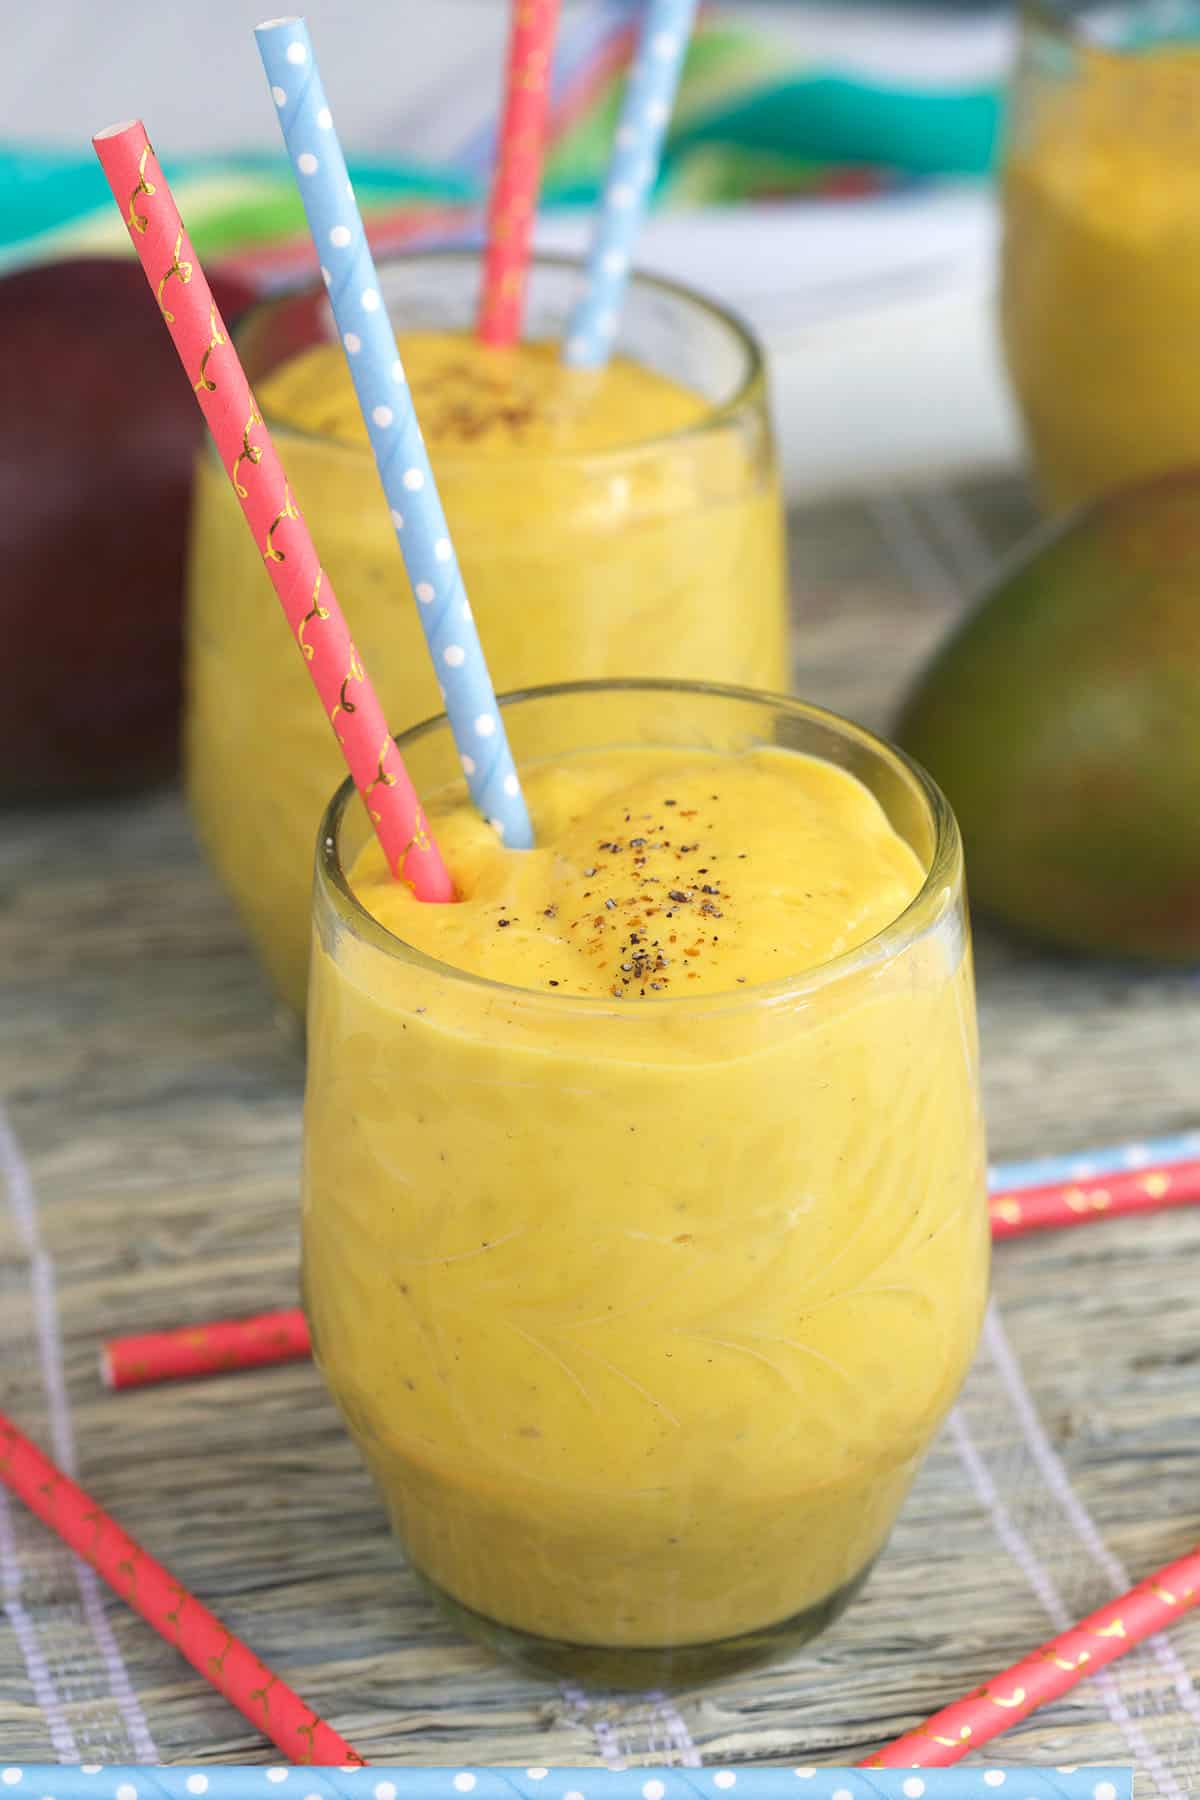 A glass of mango lassi has two straws placed in it.